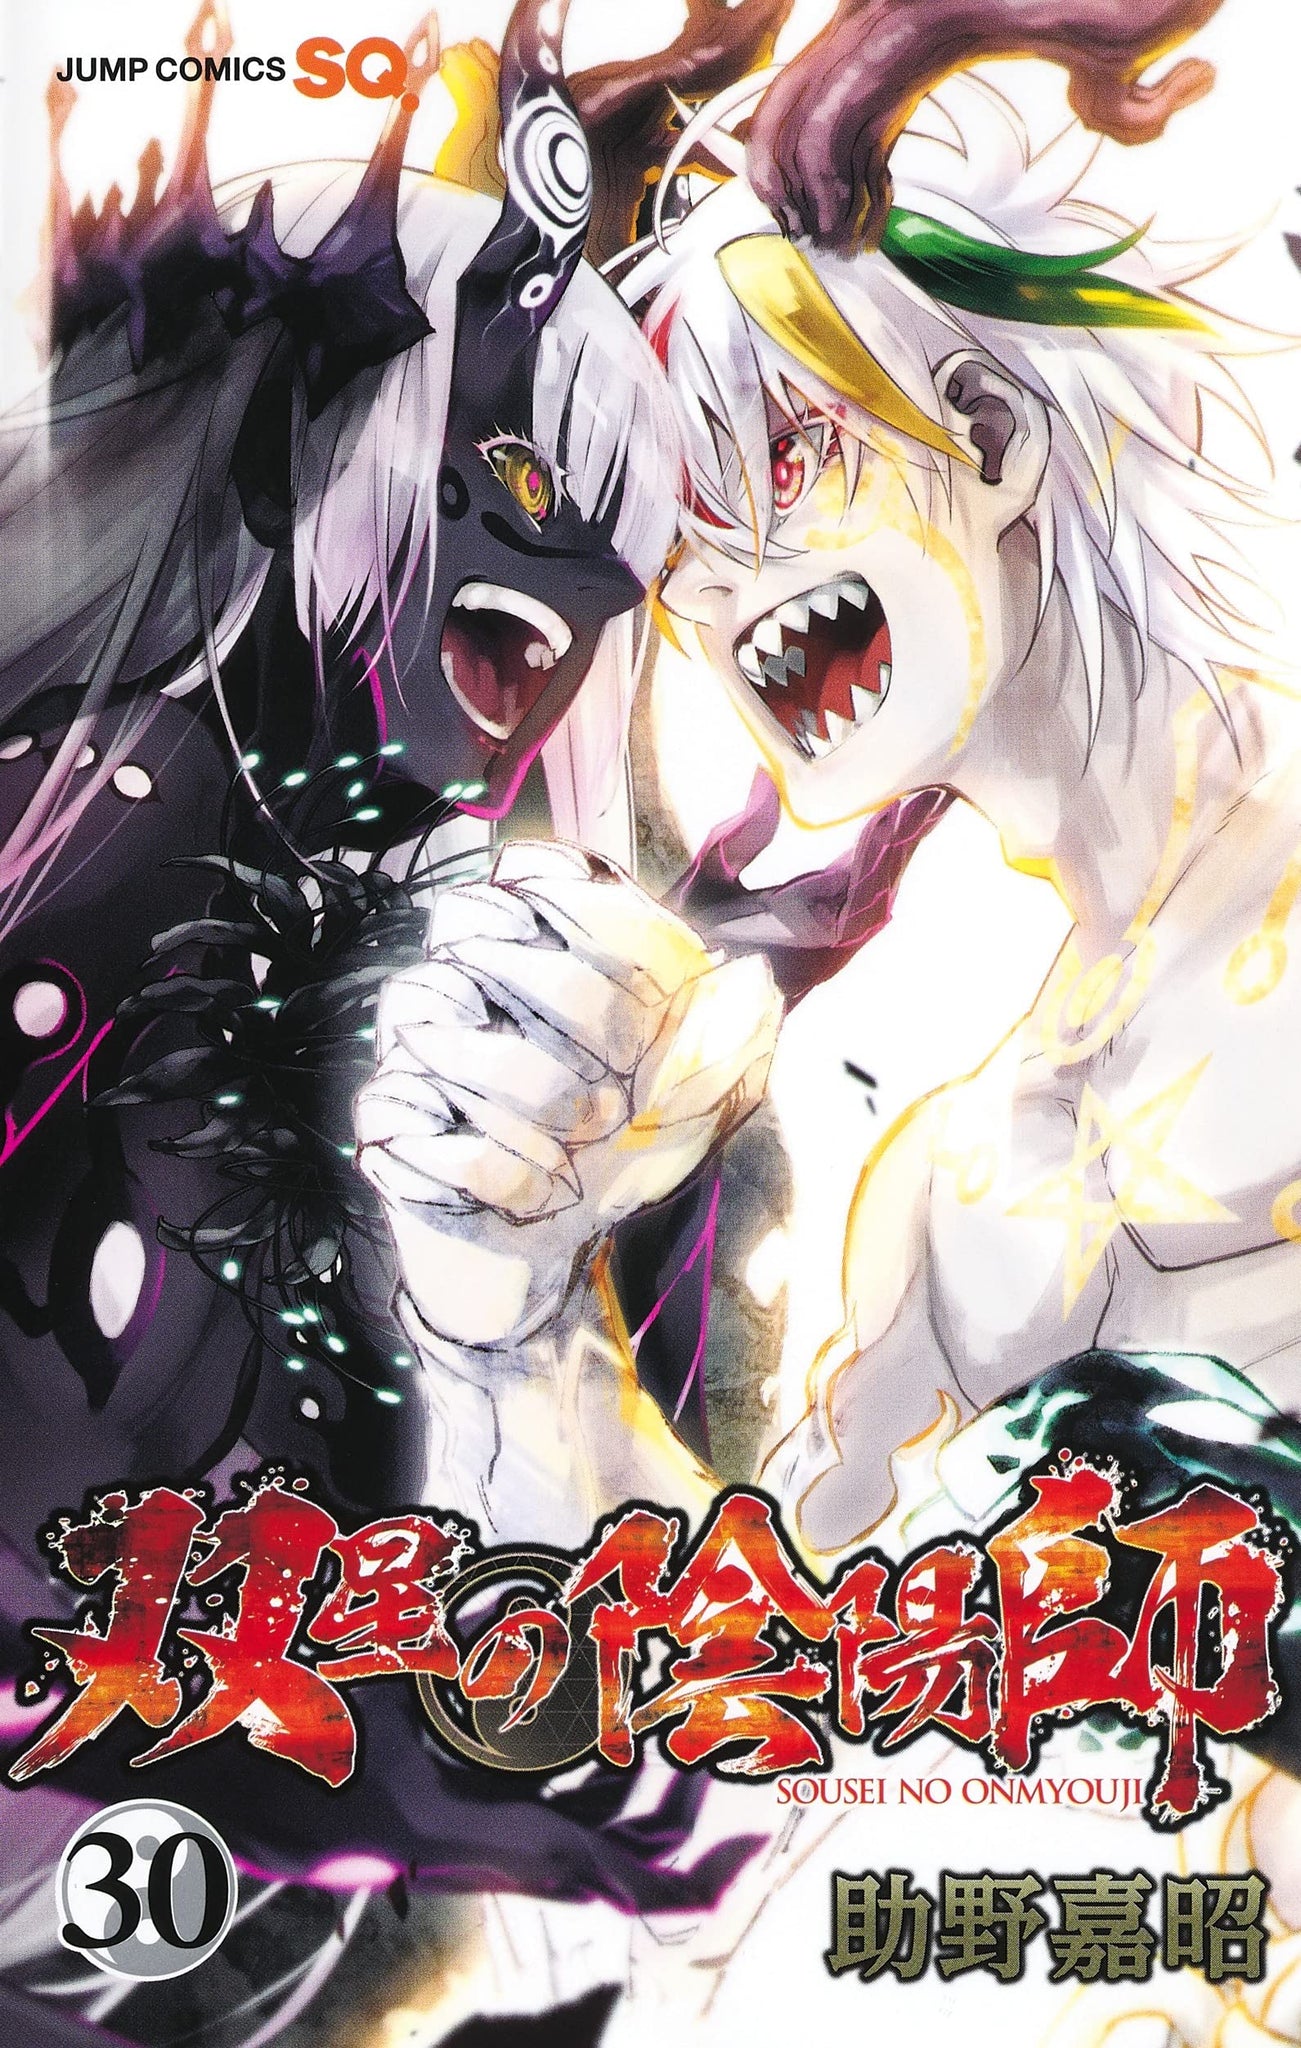 Twin Star Exorcists - Manga Review 